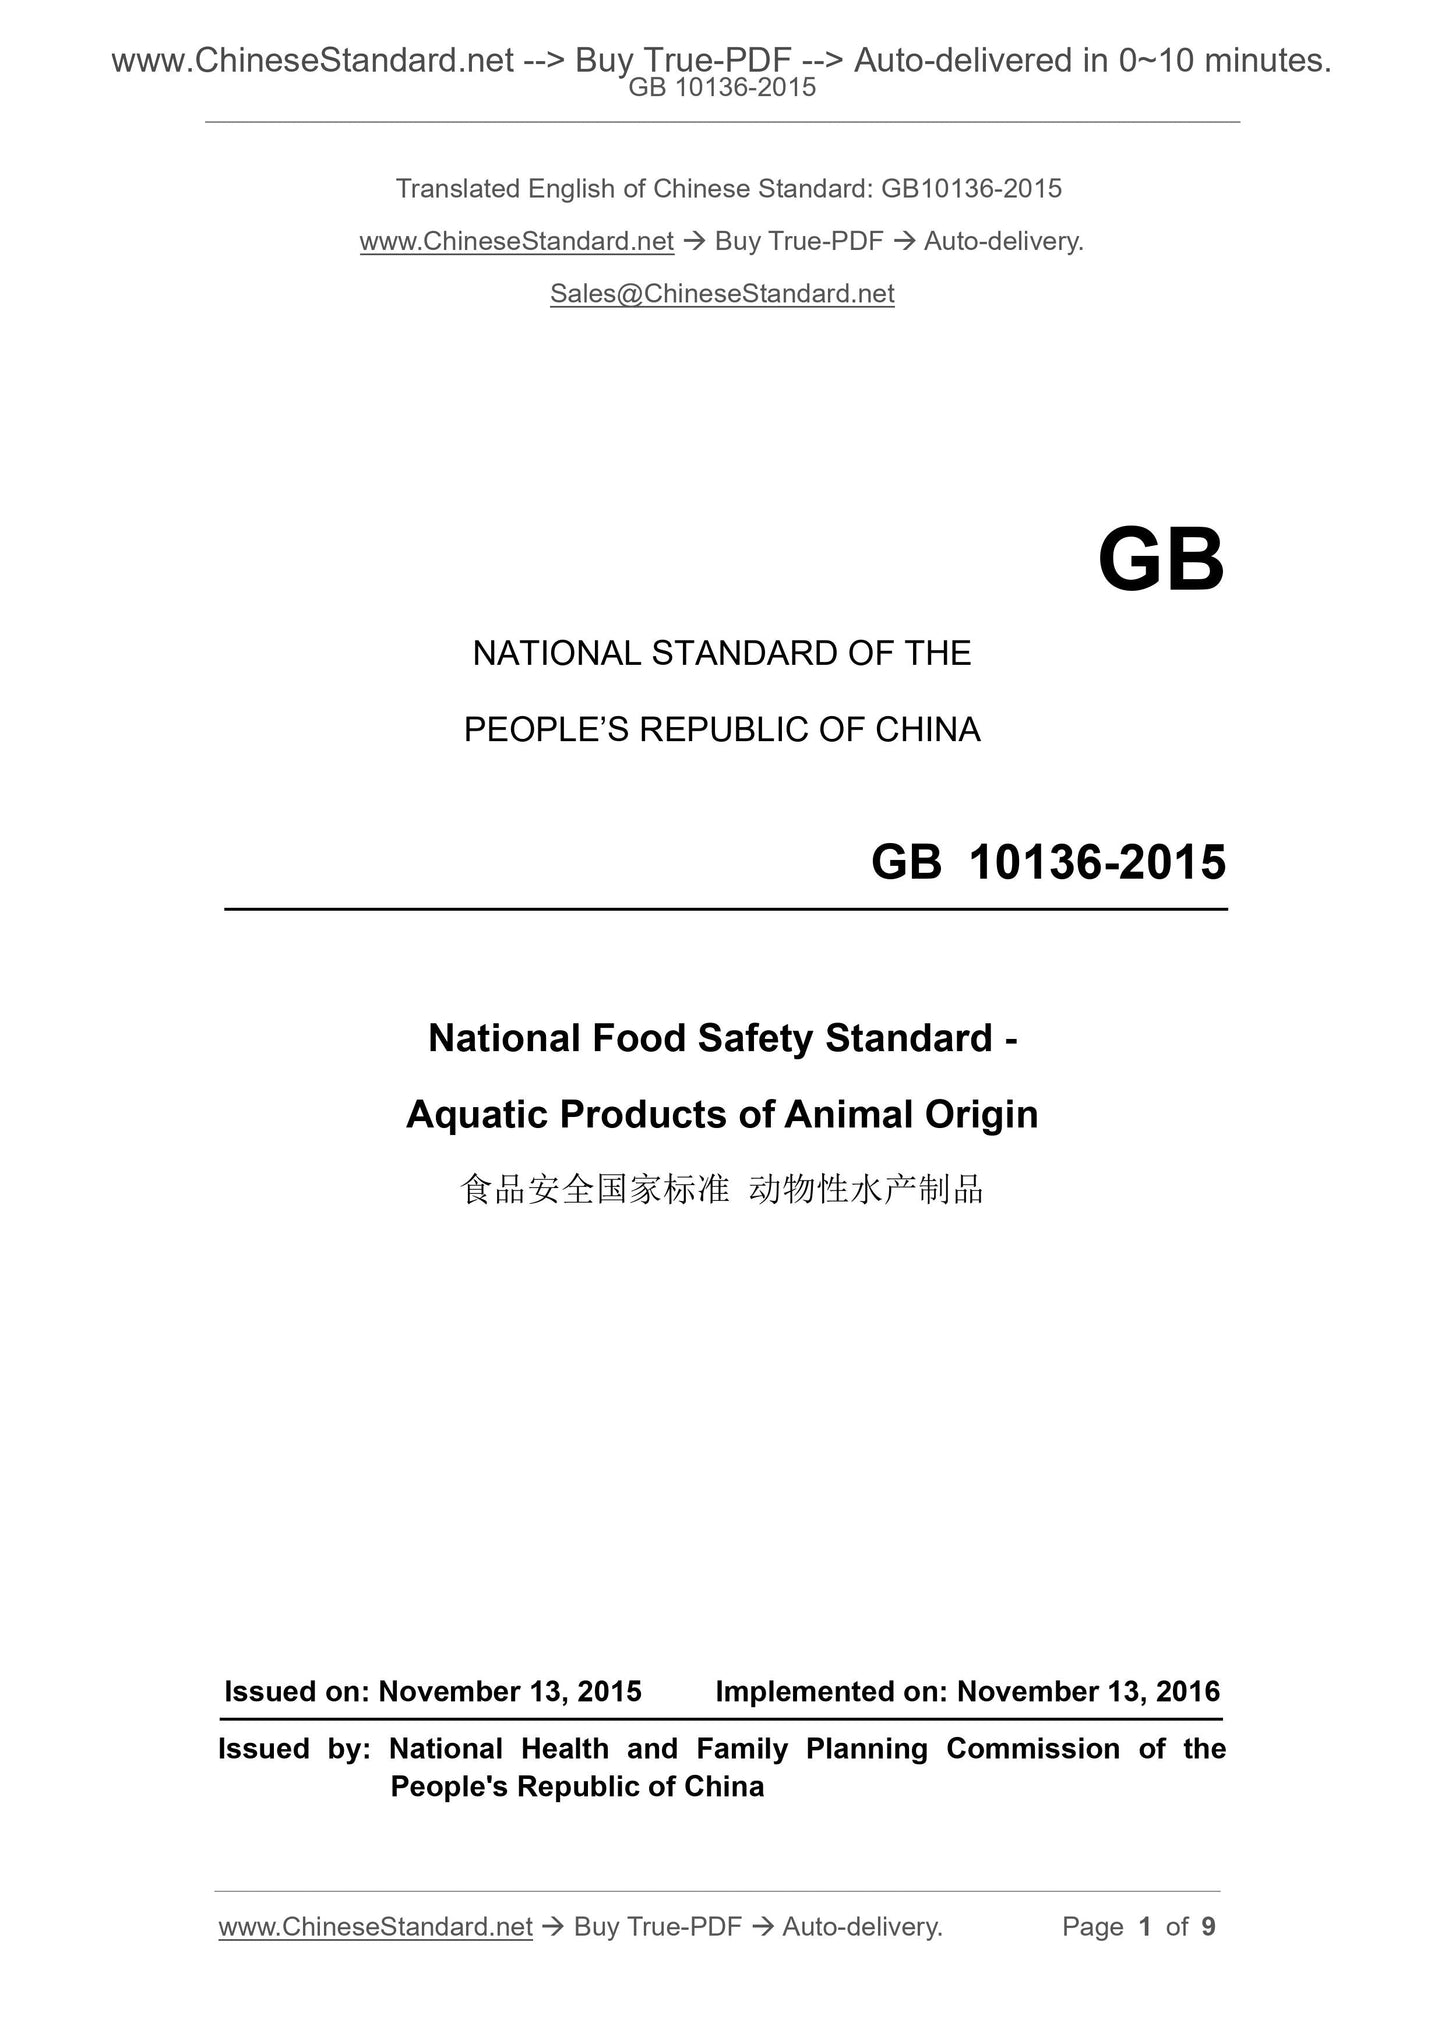 GB 10136-2015 Page 1